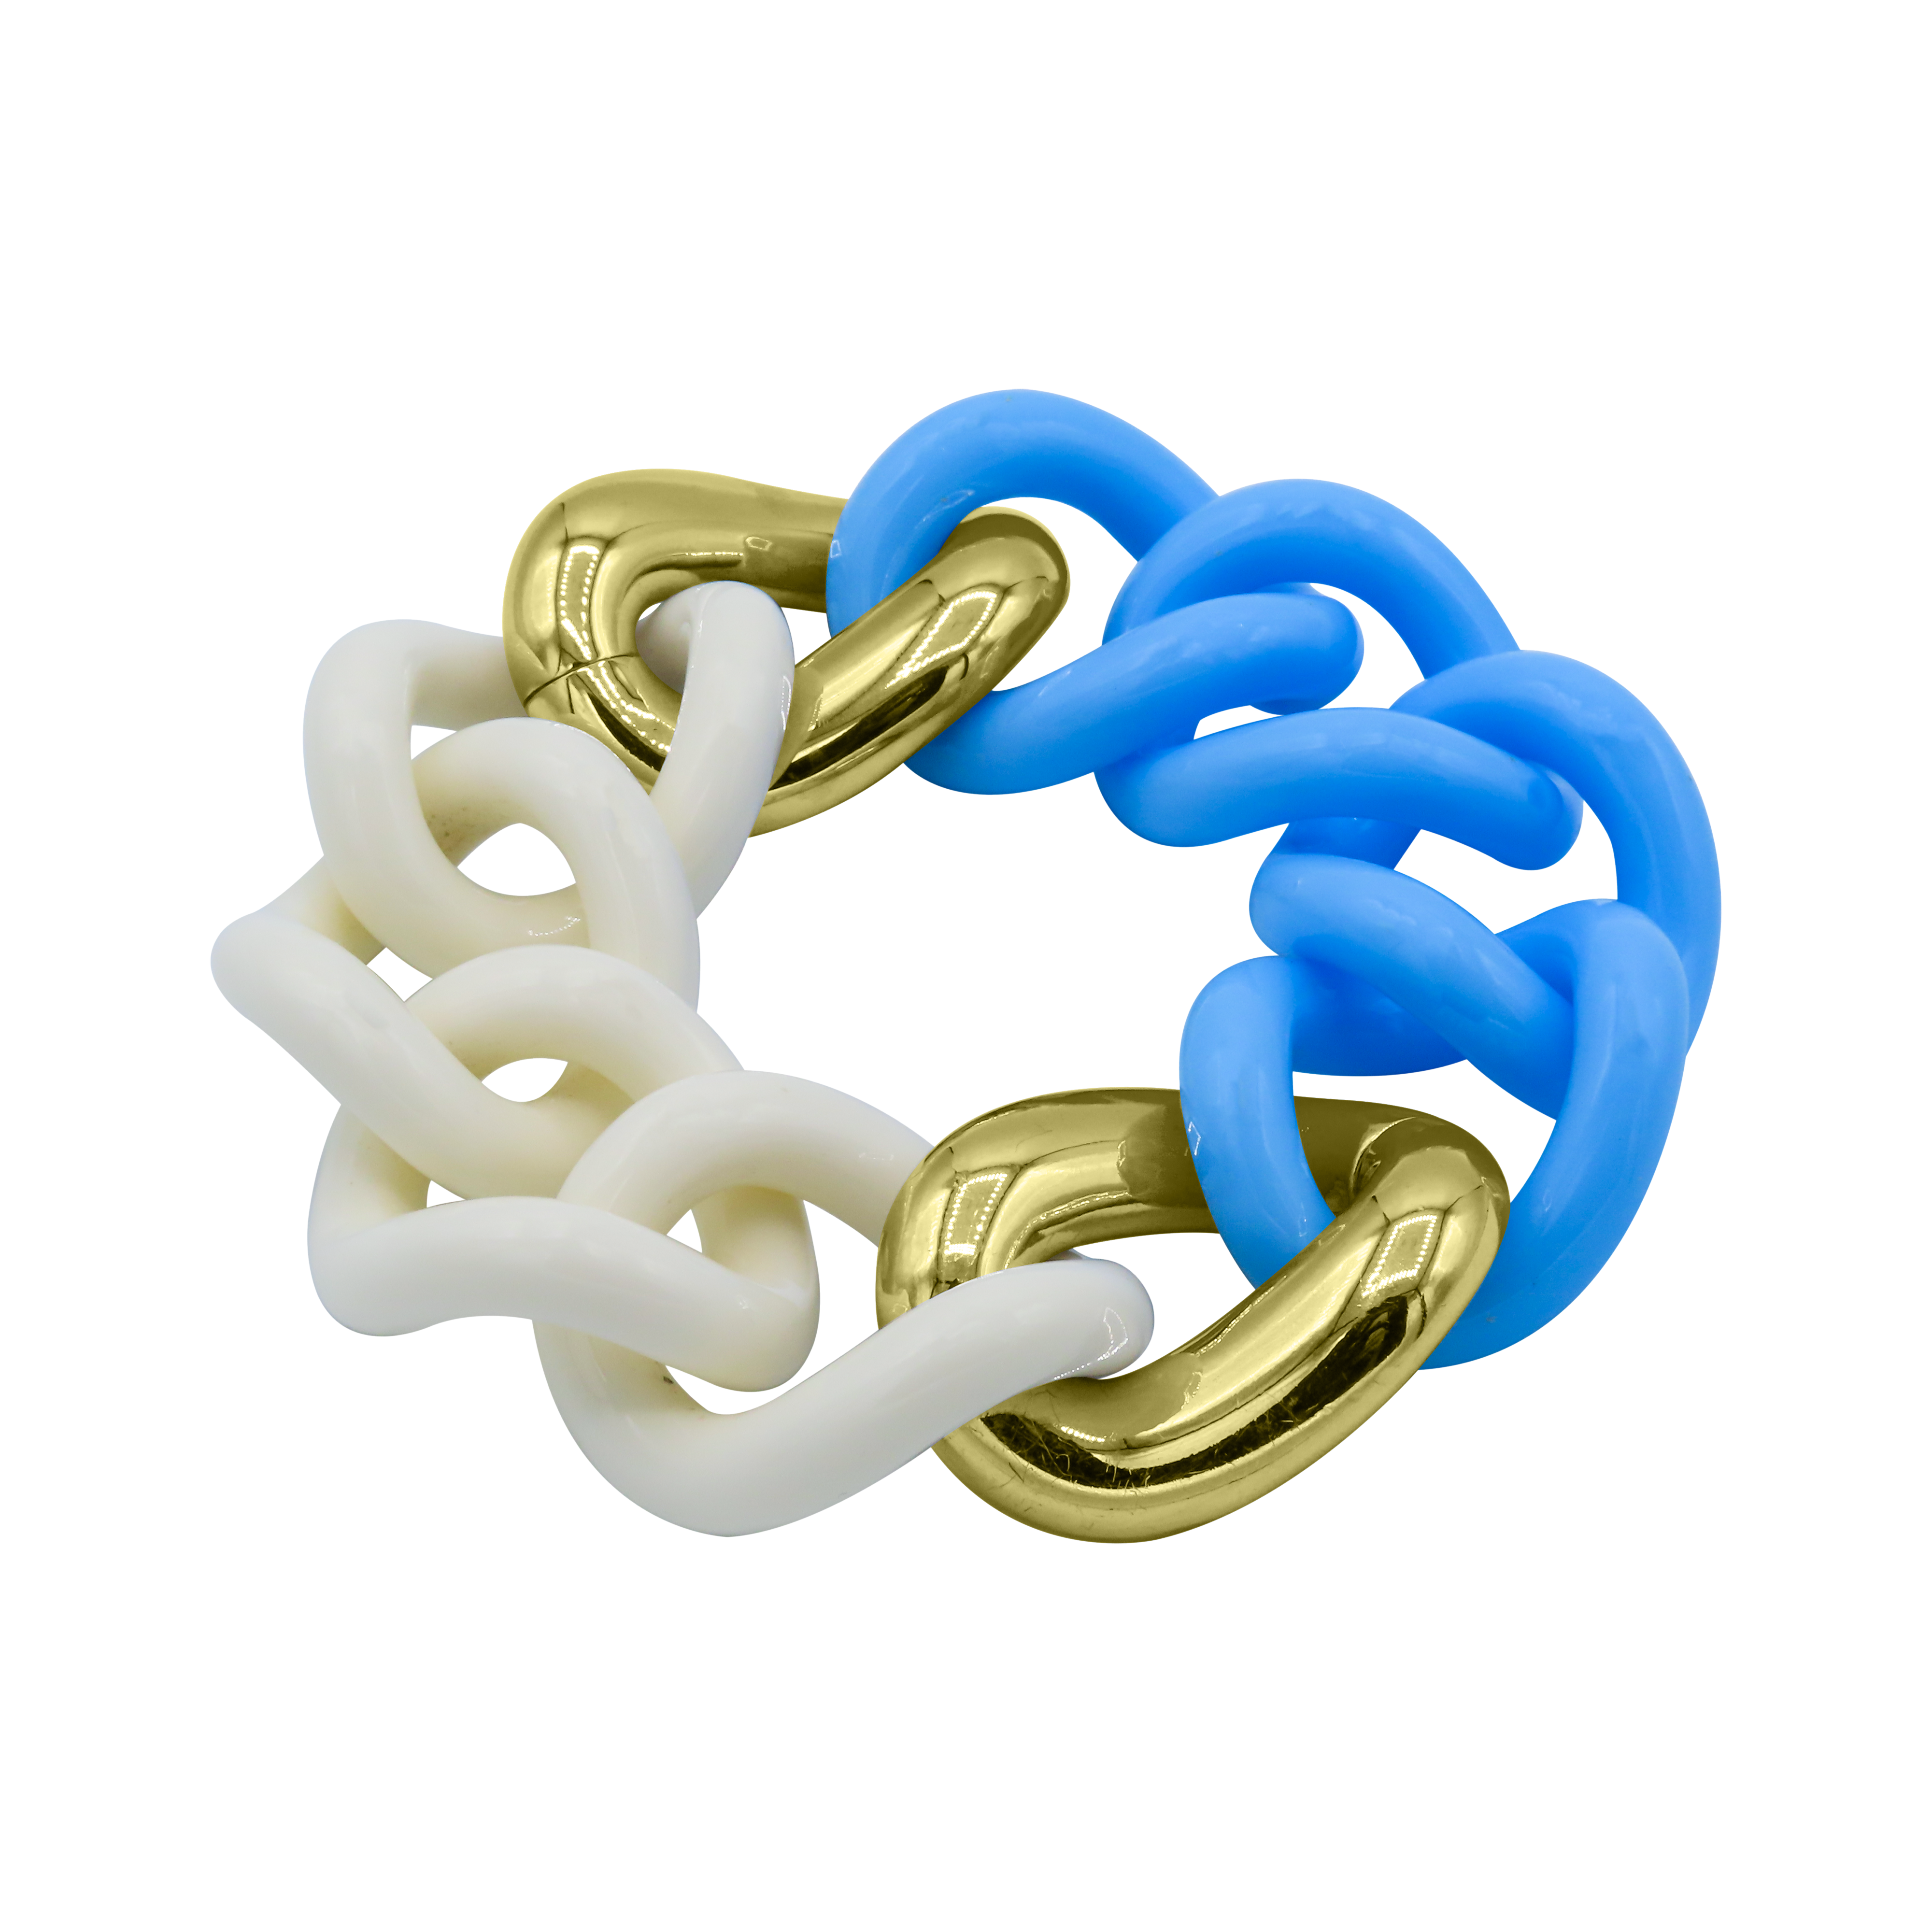 Composite - White/Blue - Gold plated